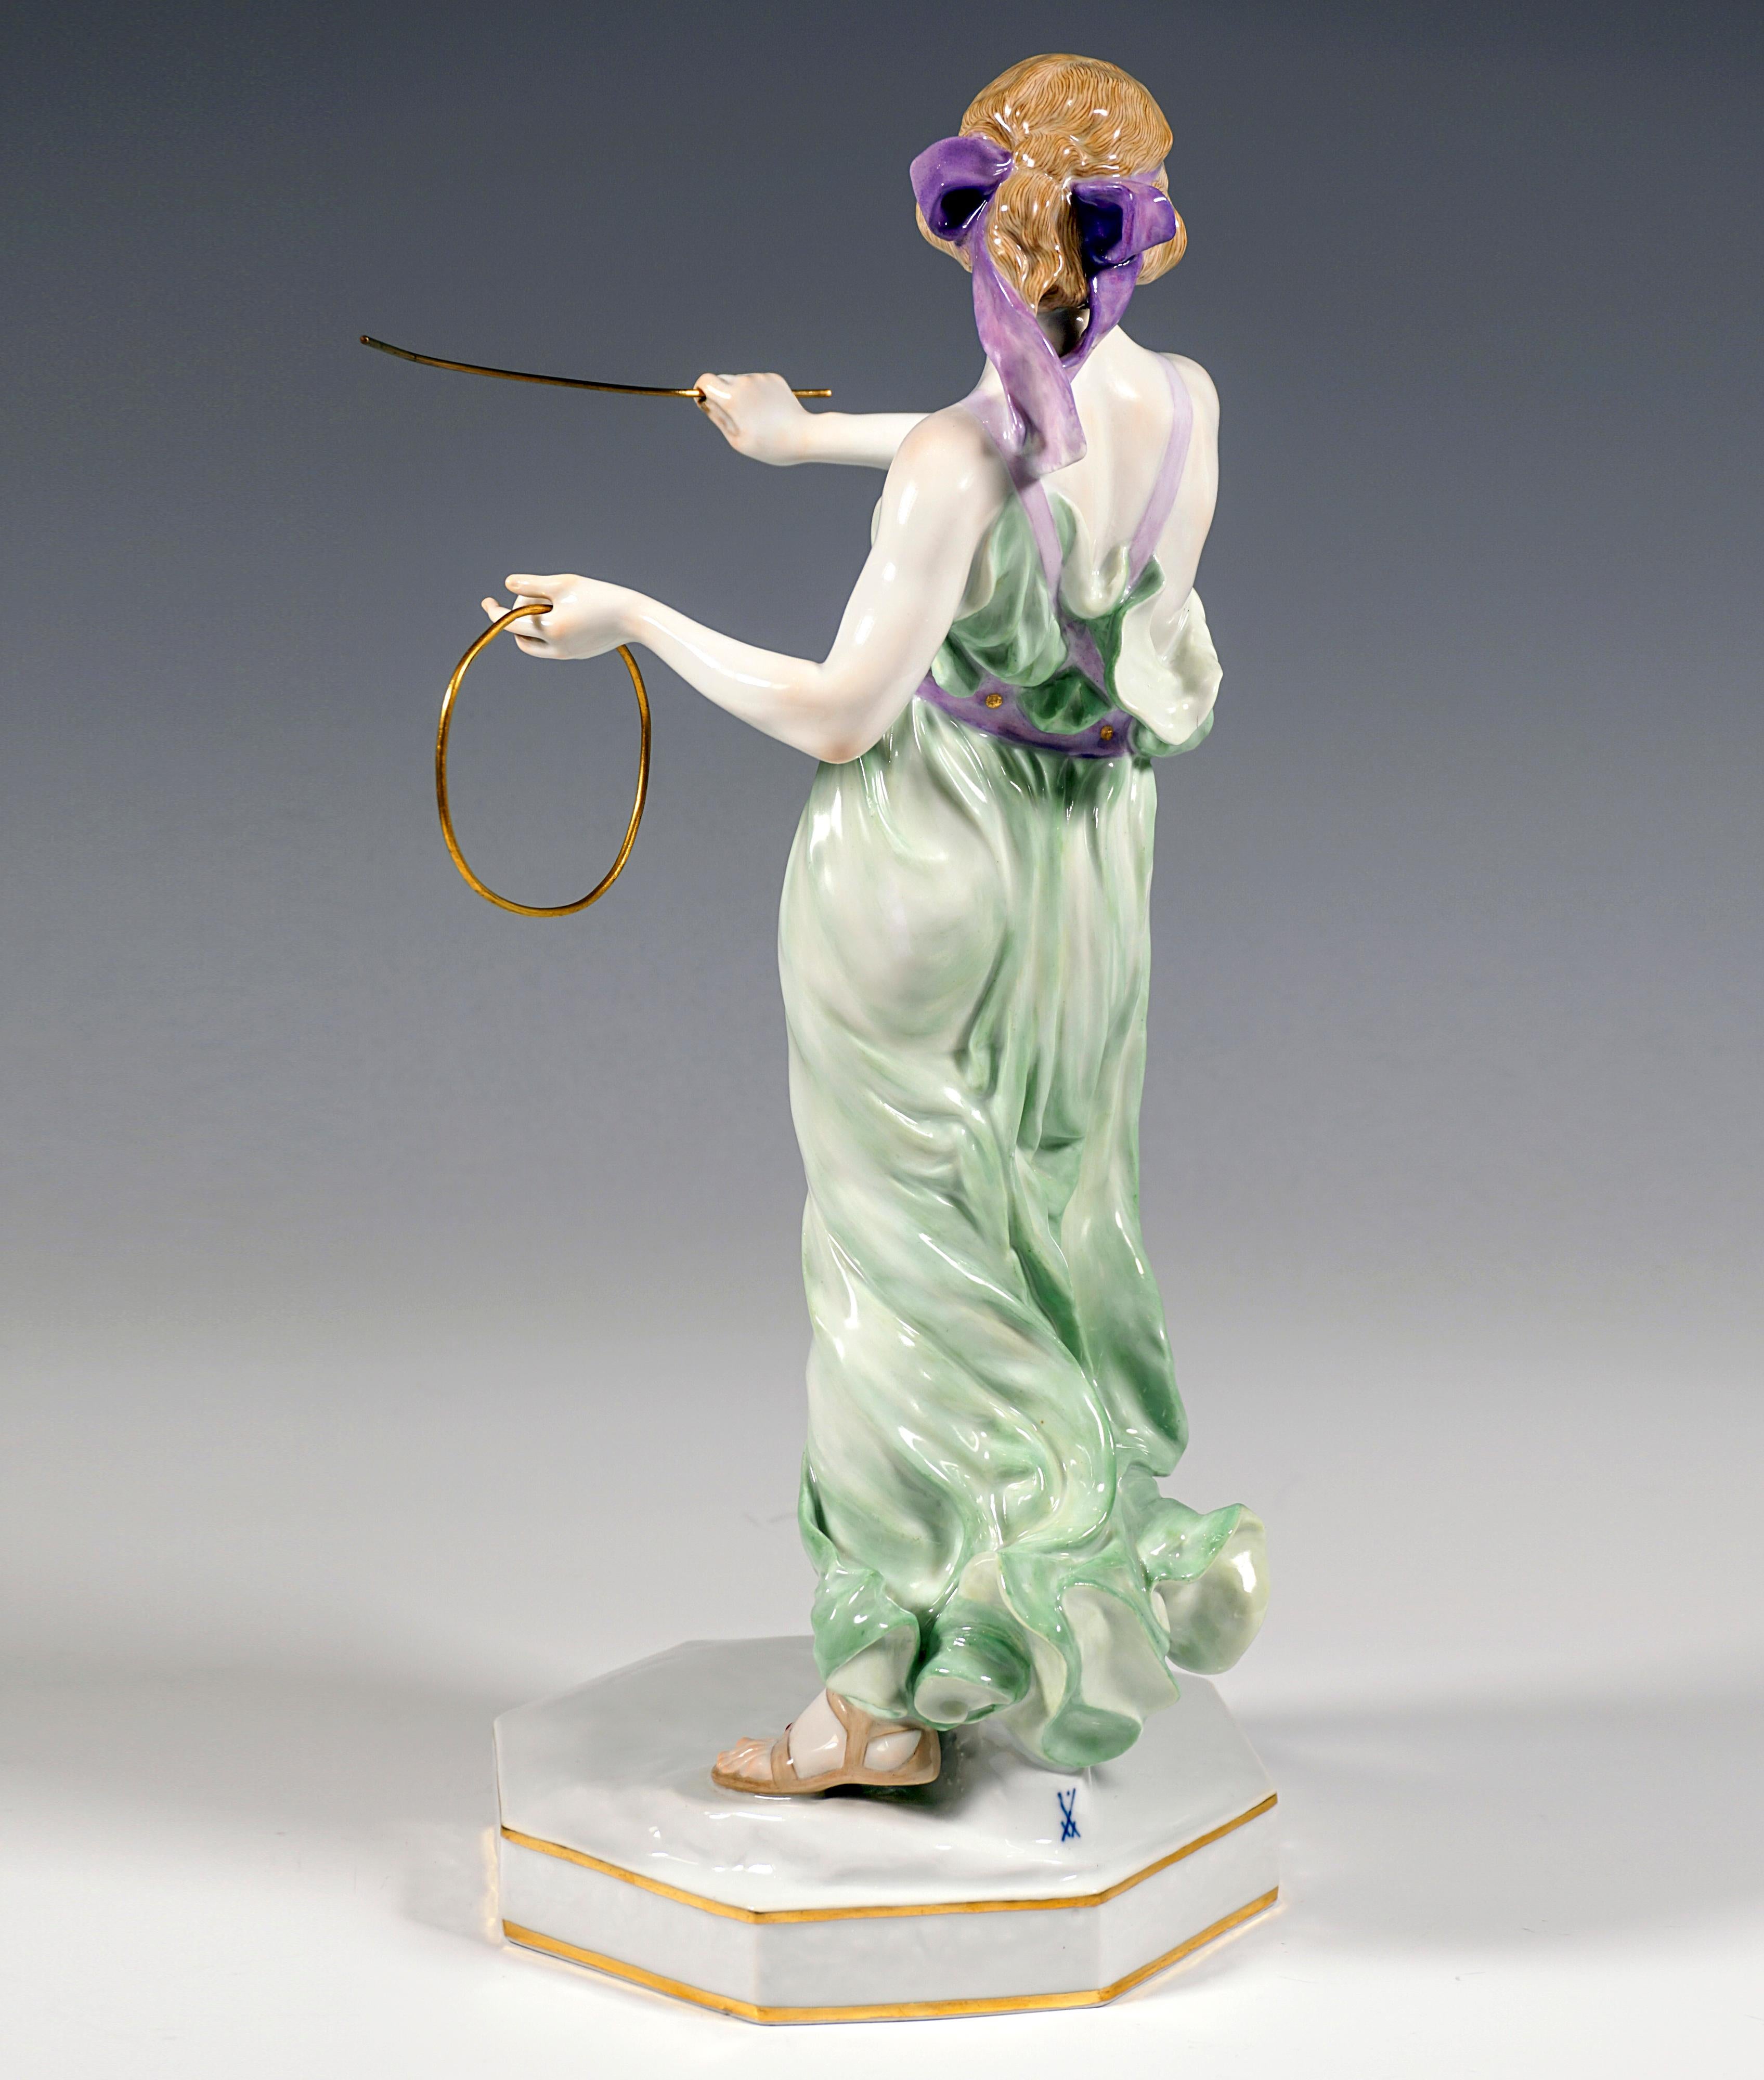 Hand-Crafted Meissen Art Nouveau Figurine, Young Lady Ring Thrower, by R. Boeltzig, Ca 1924 For Sale